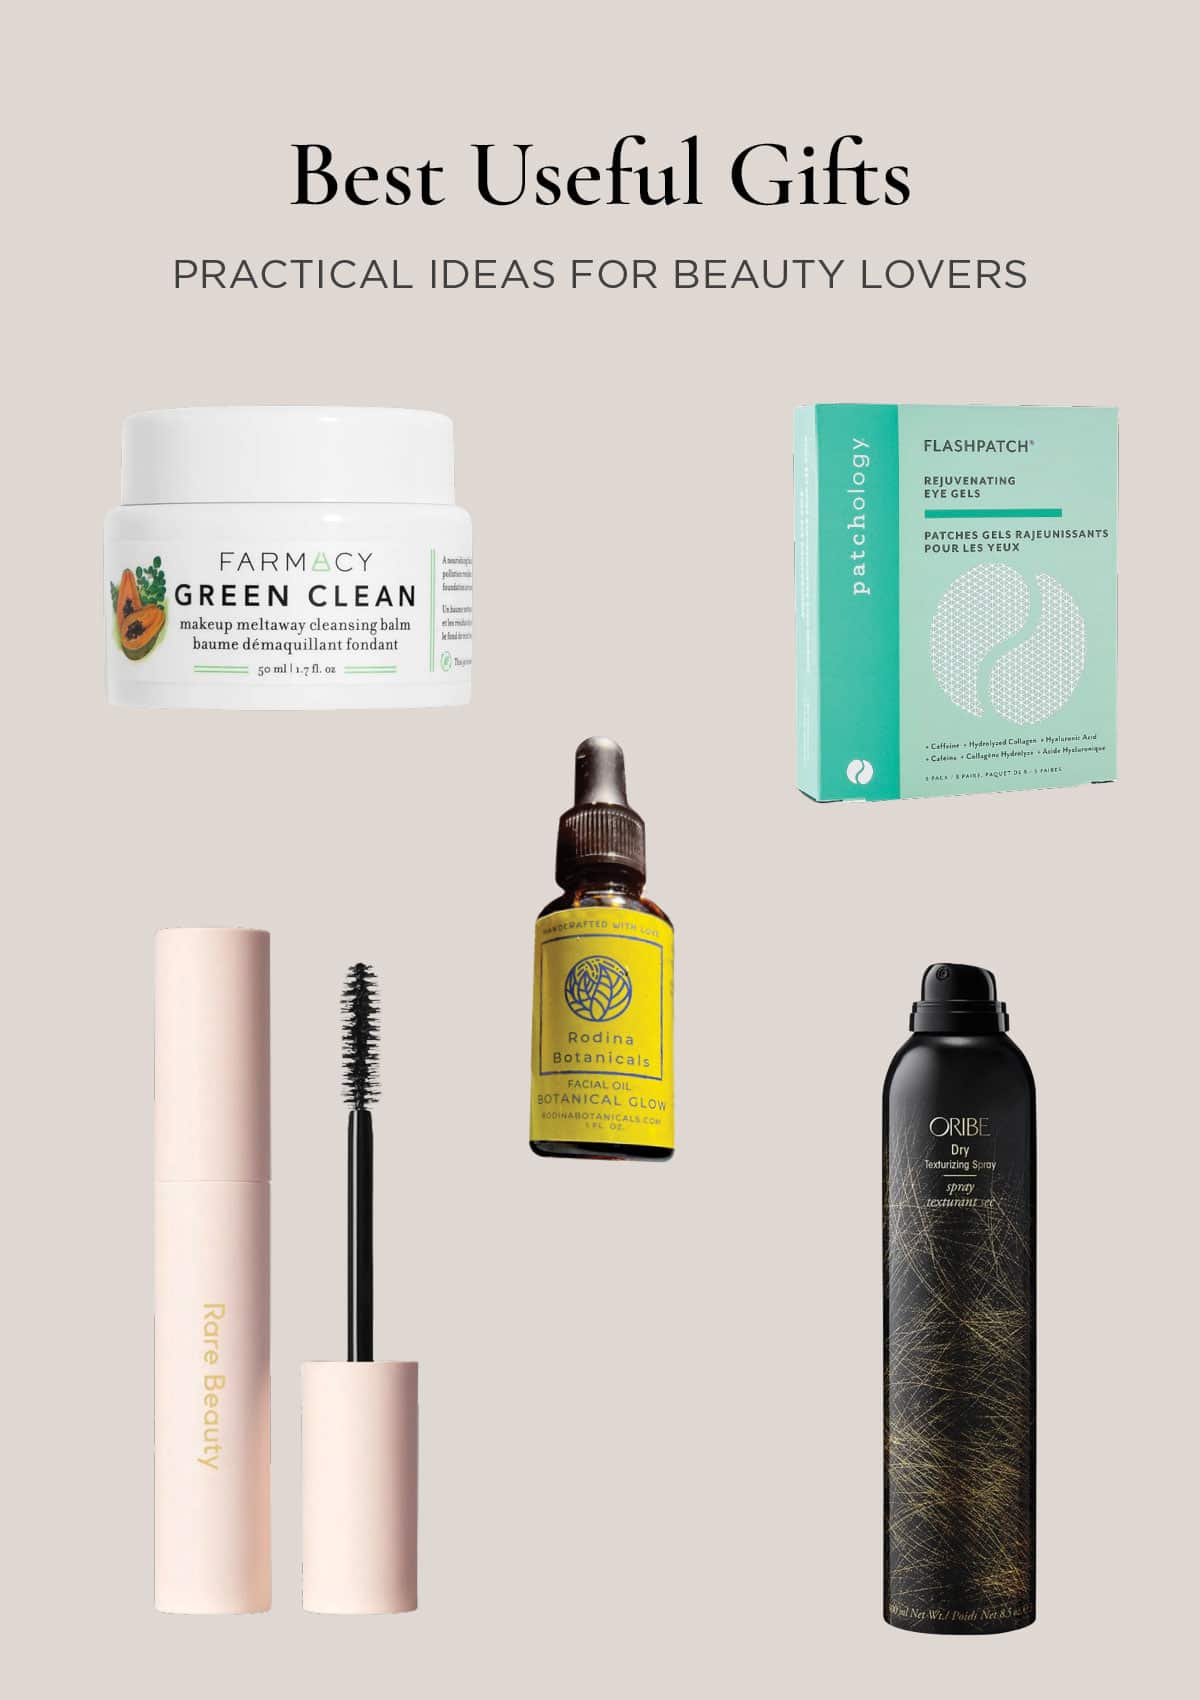 Useful Gift Ideas - The Practical Gift Guide. Useful gifts for the beauty lover like Farmacy facial cleanser and the best facial oil